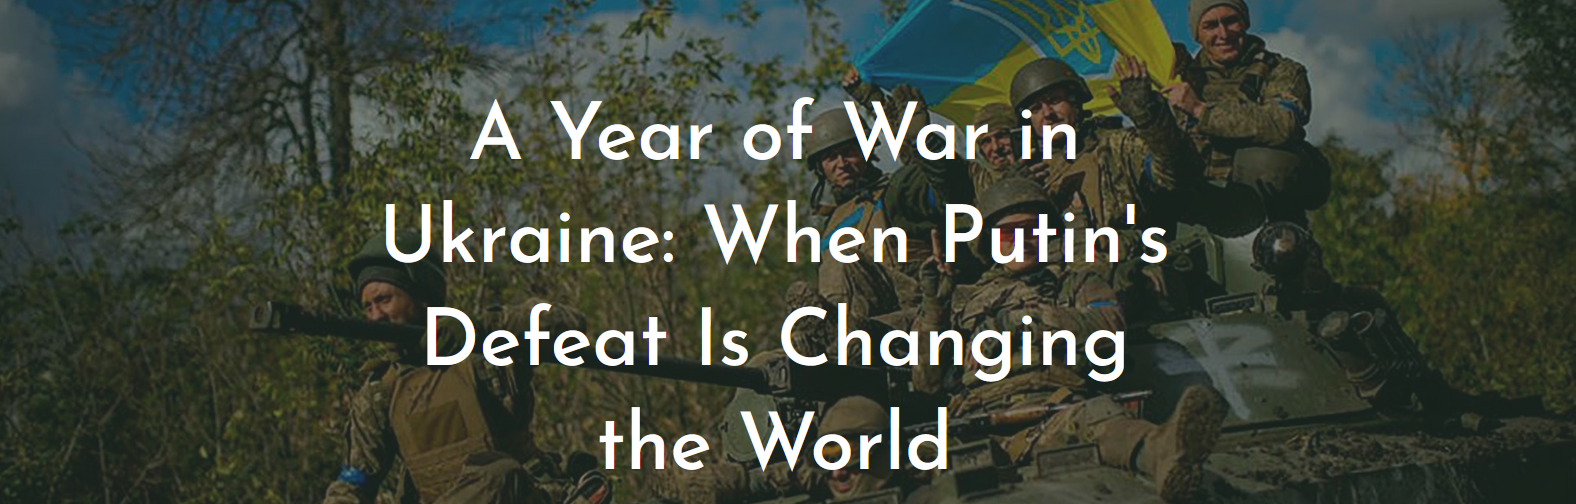 A Year of War in Ukraine: When Putin’s Defeat Is Changing the World